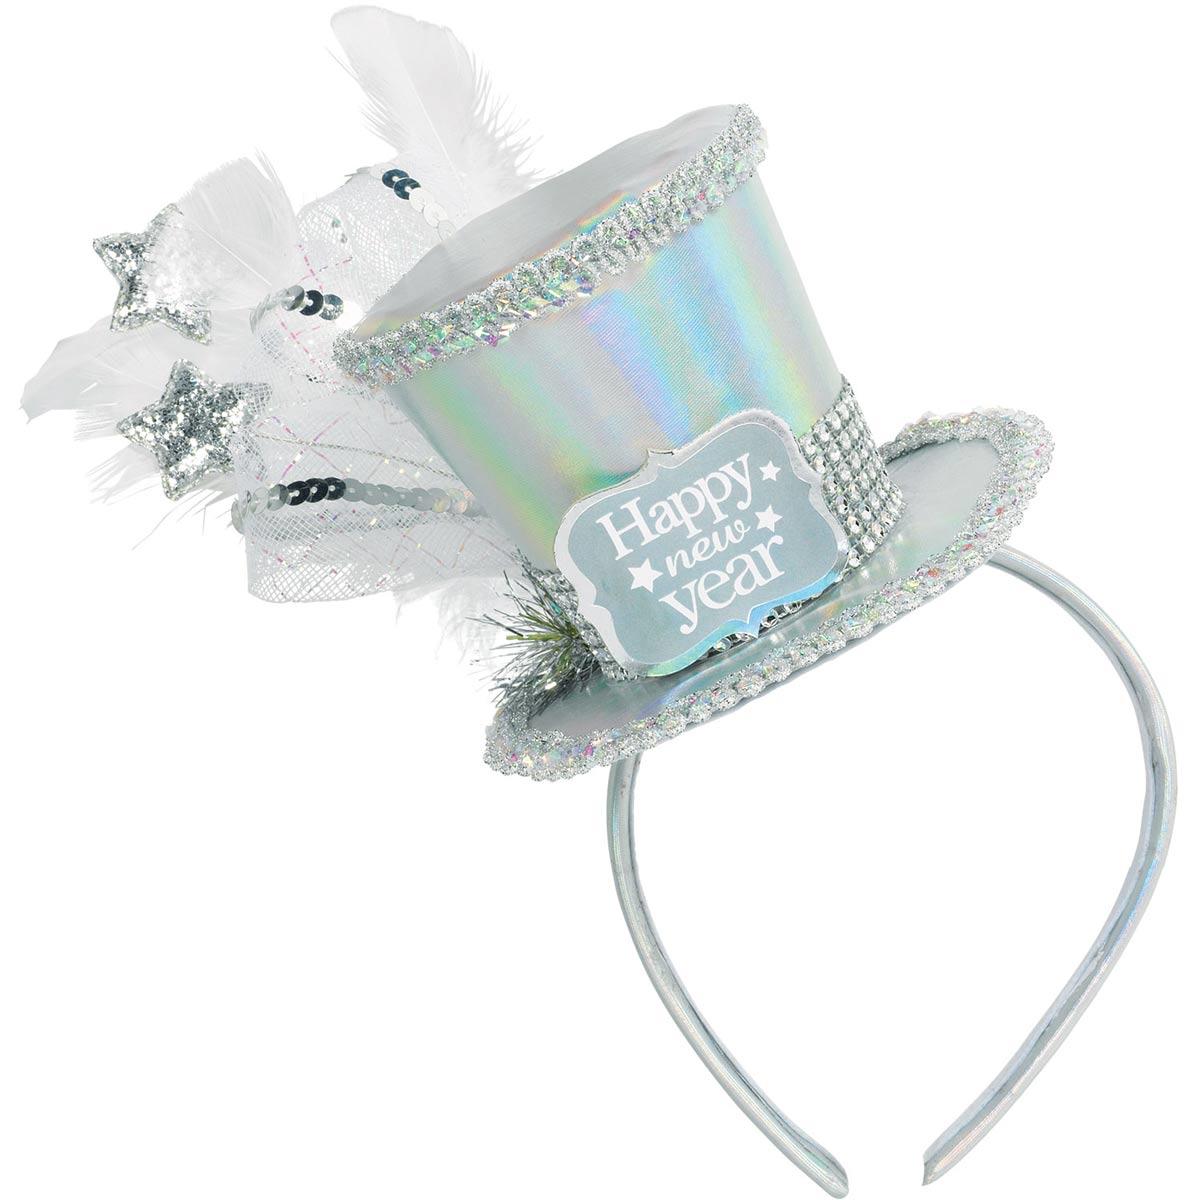 Disco Ball Drop Deluxe NEW YEAR Headband by Amscan 3900454 available here at Karnival Costumes online party shop